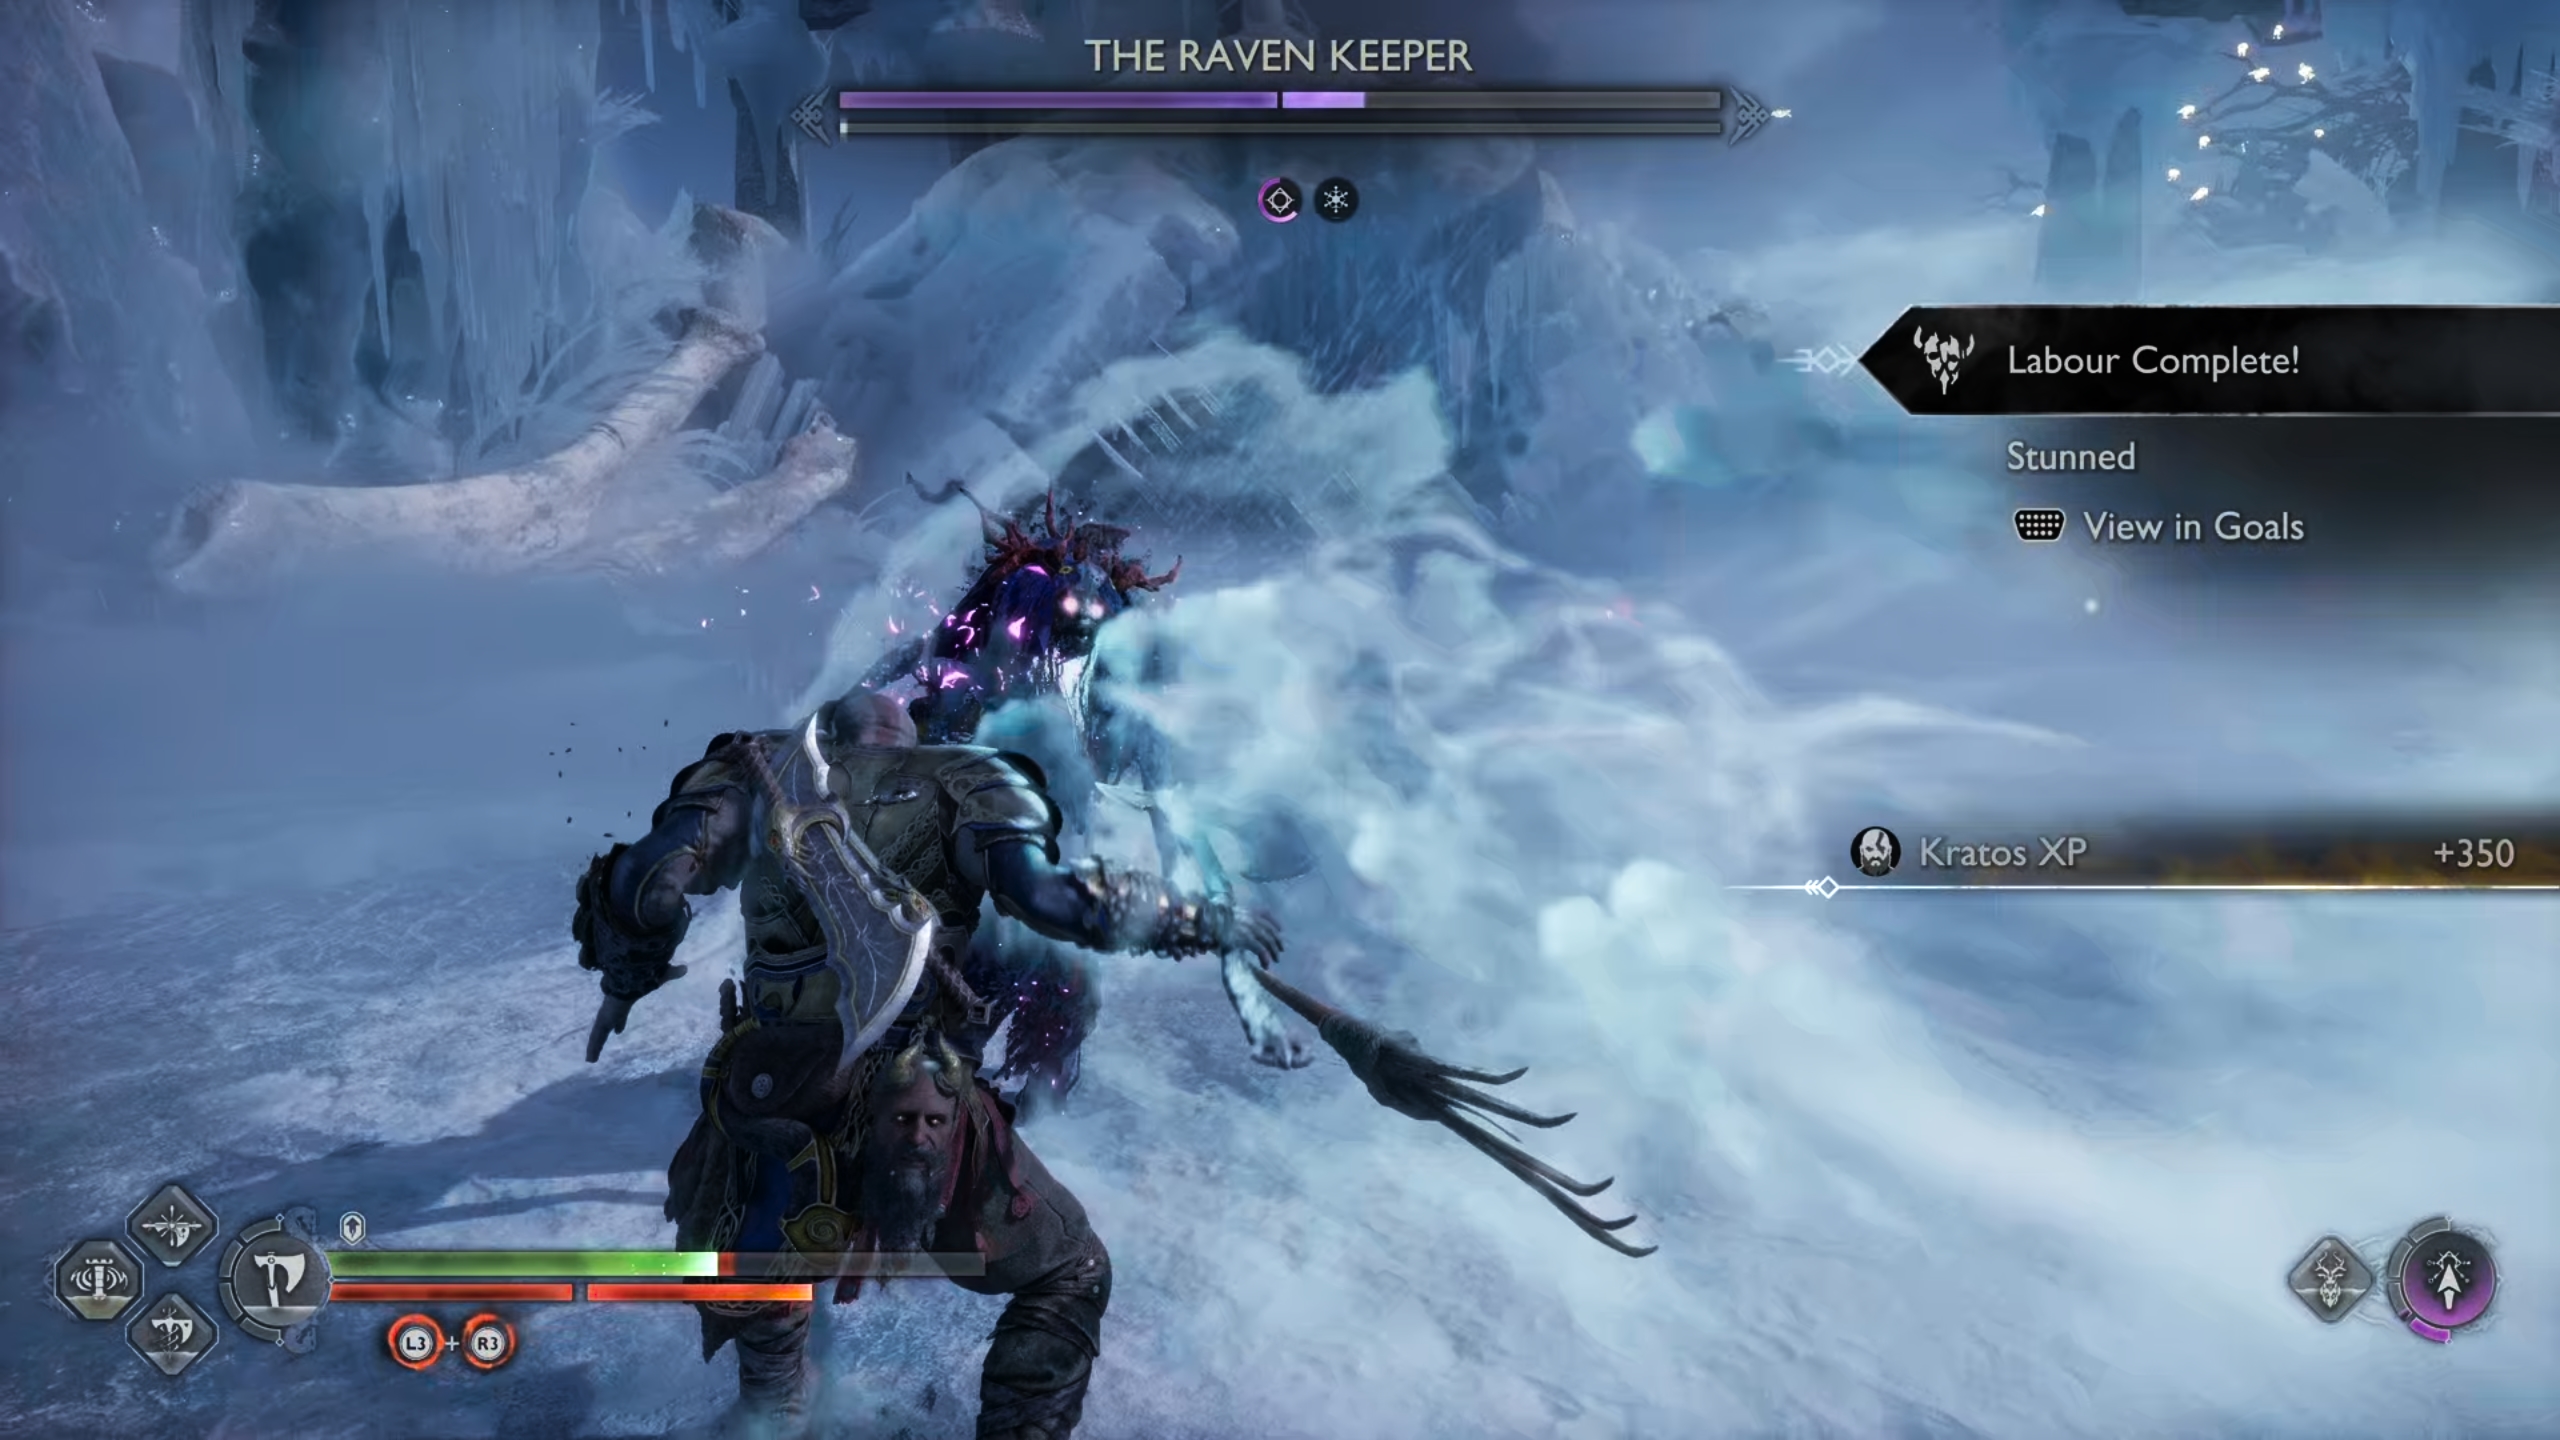 You can dodge the ice breath attack.